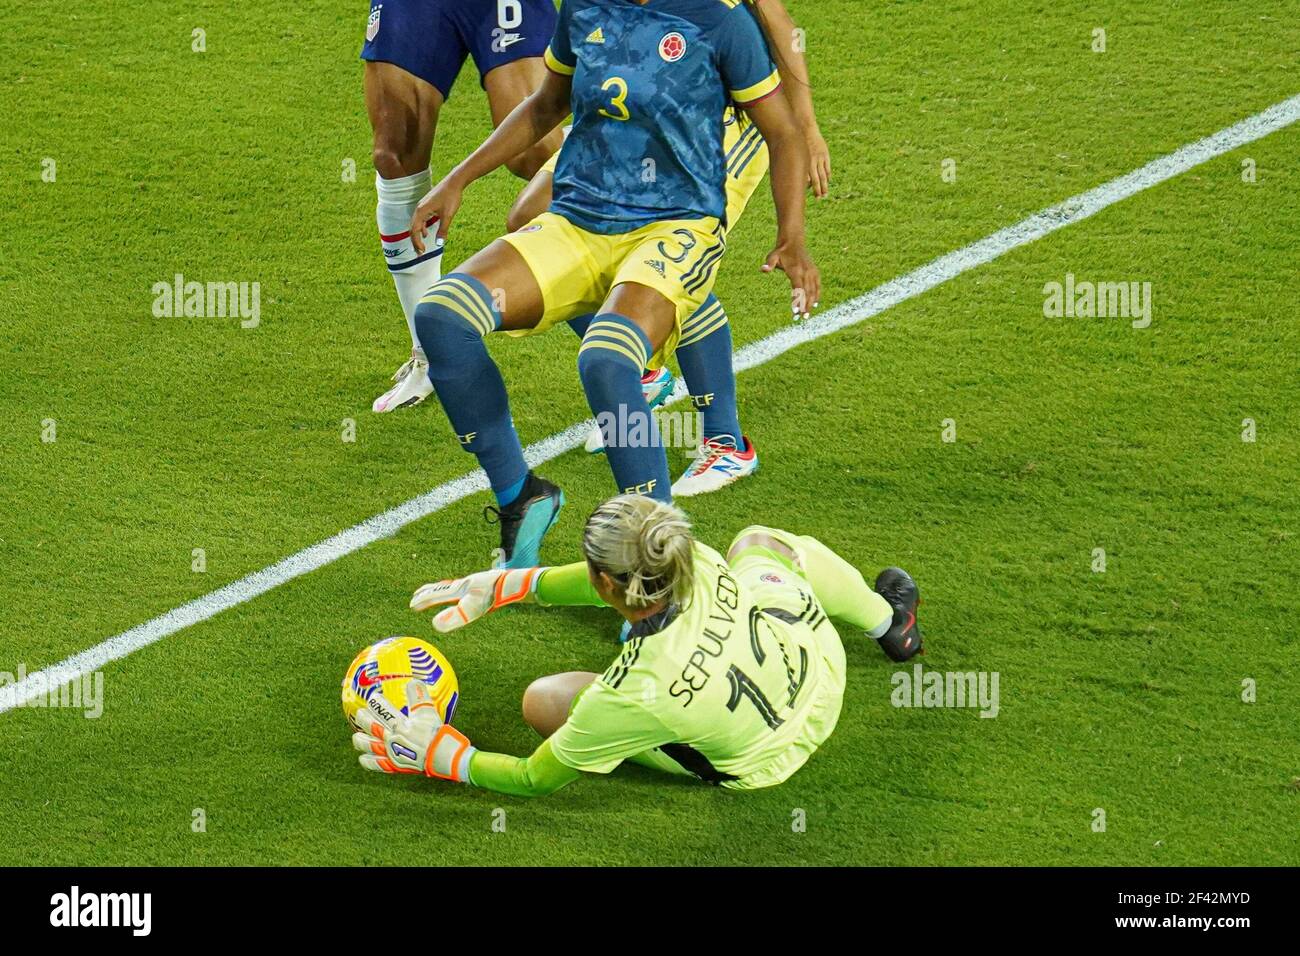 Orlando, Florida, USA, January 22, 2021, Colombia Goalkeeper Sepulveda, Sandra #12 makes a save during the match against Colombia.  (Photo Credit:  Marty Jean-Louis) Stock Photo